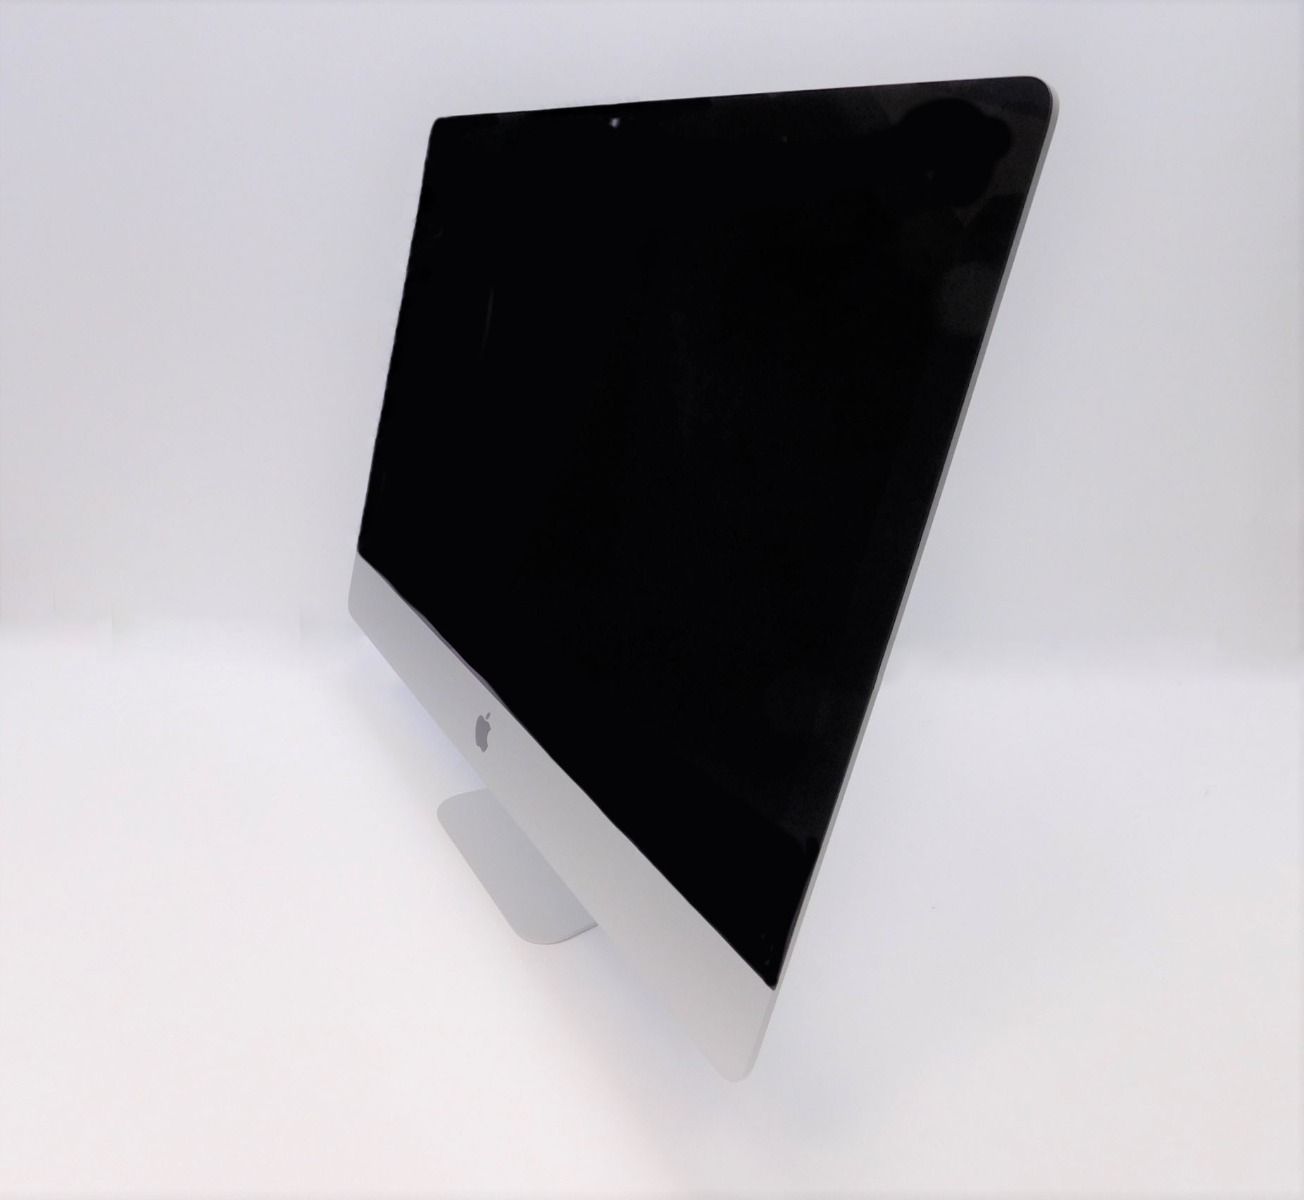 Apple iMac All-In-One 13,1 A1418 21.5" 2012 i5-3330S 2.70 GHz 16GB RAM